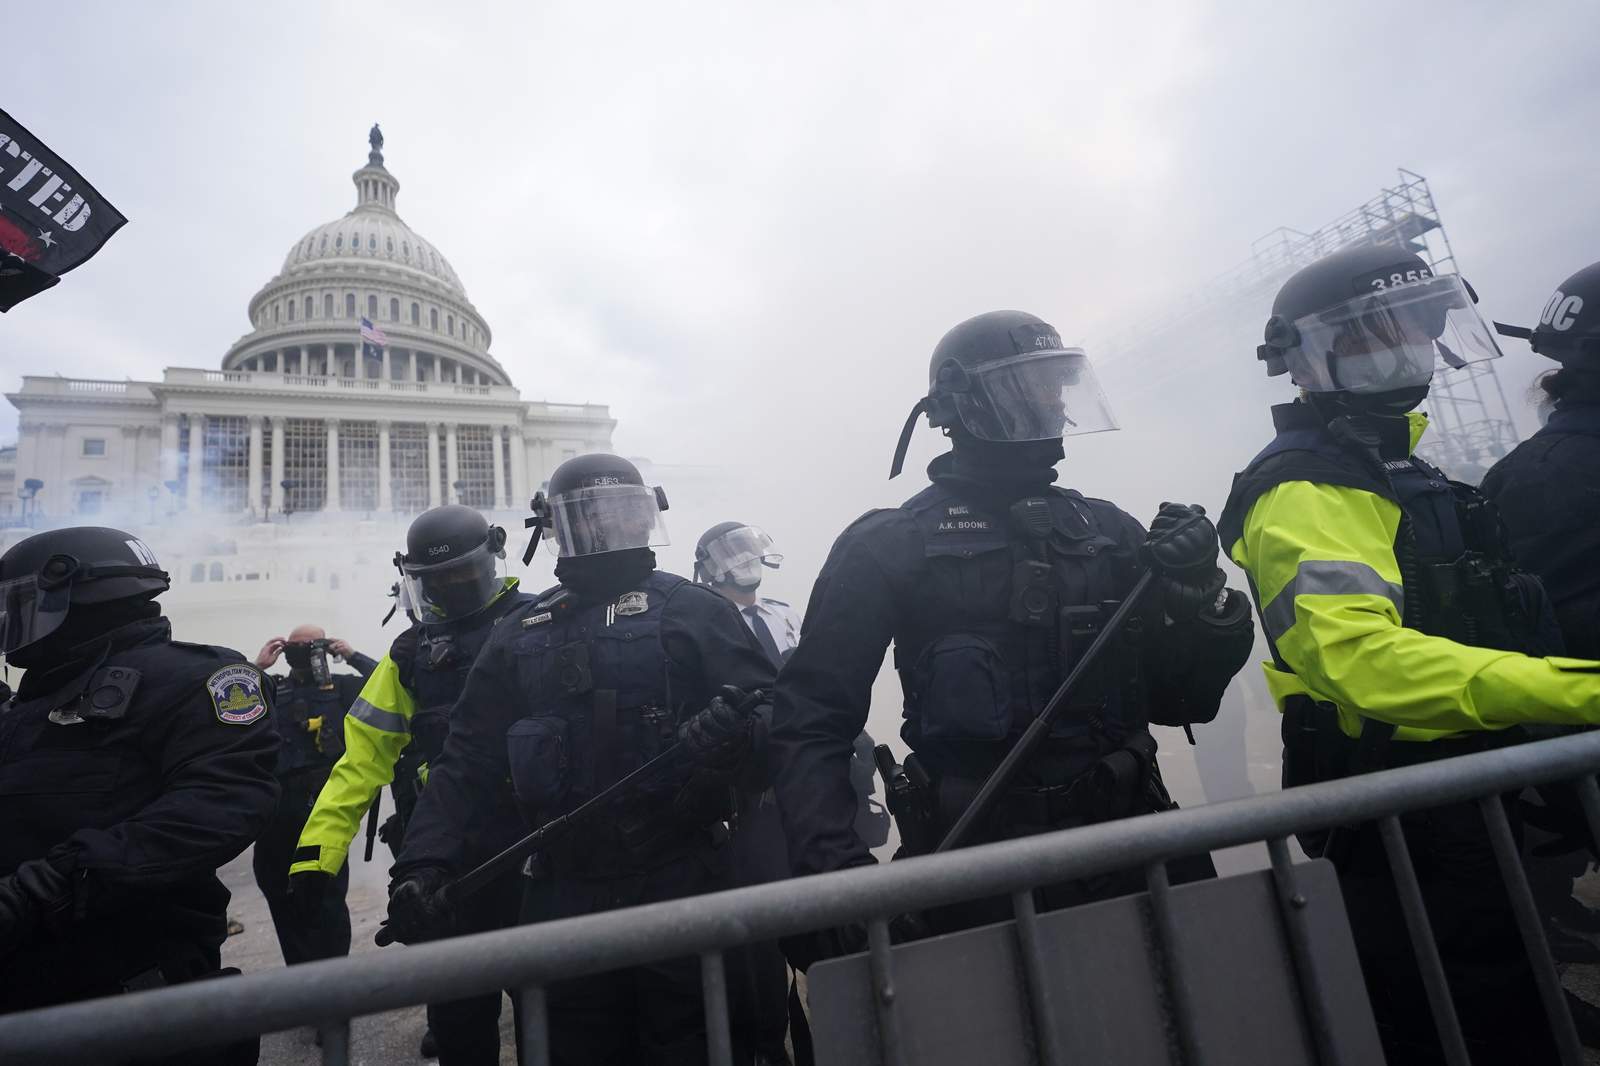 Videos, photos from Twitter show clashes at the Capitol